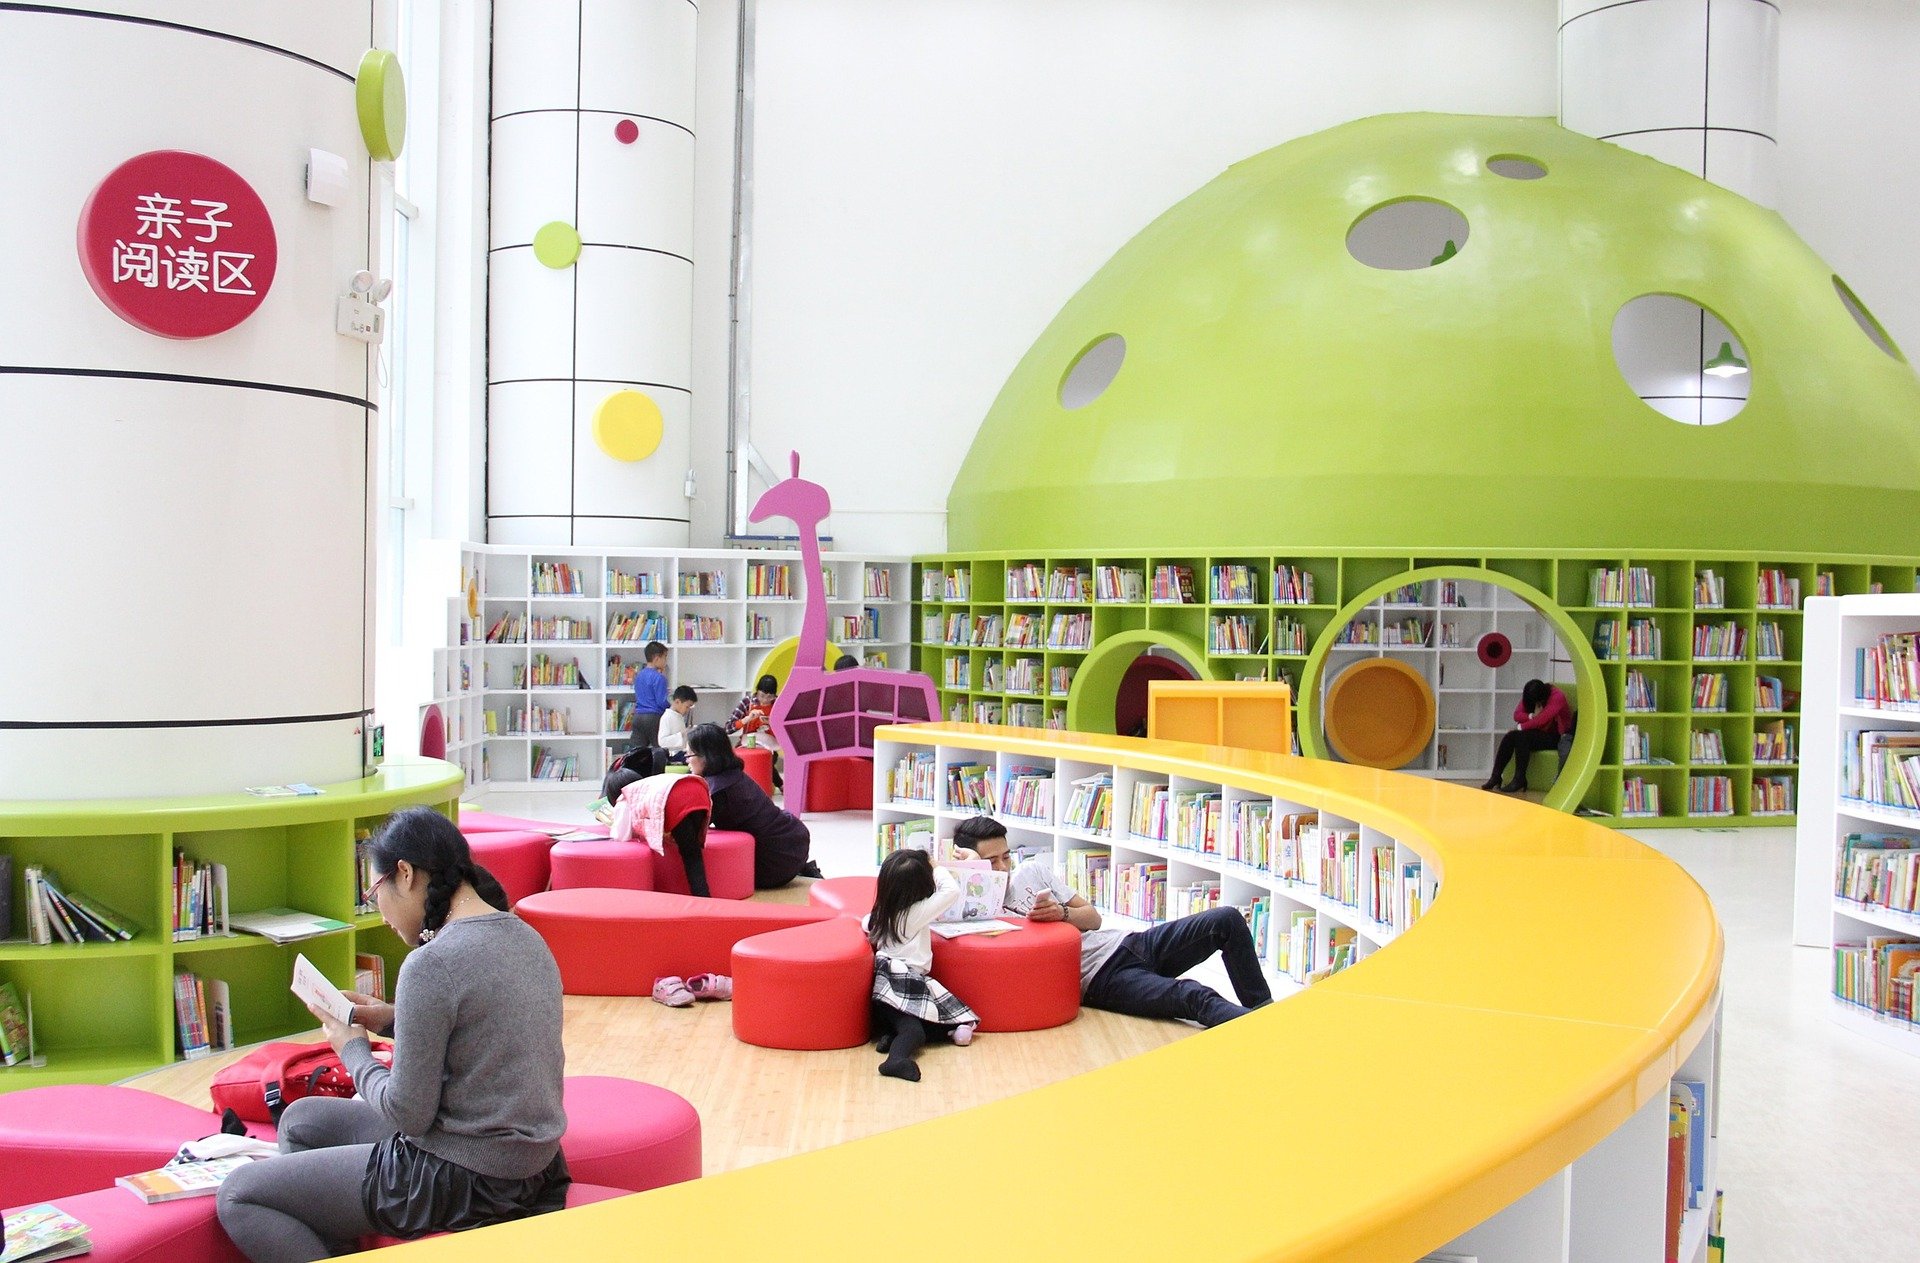 Children in a library.